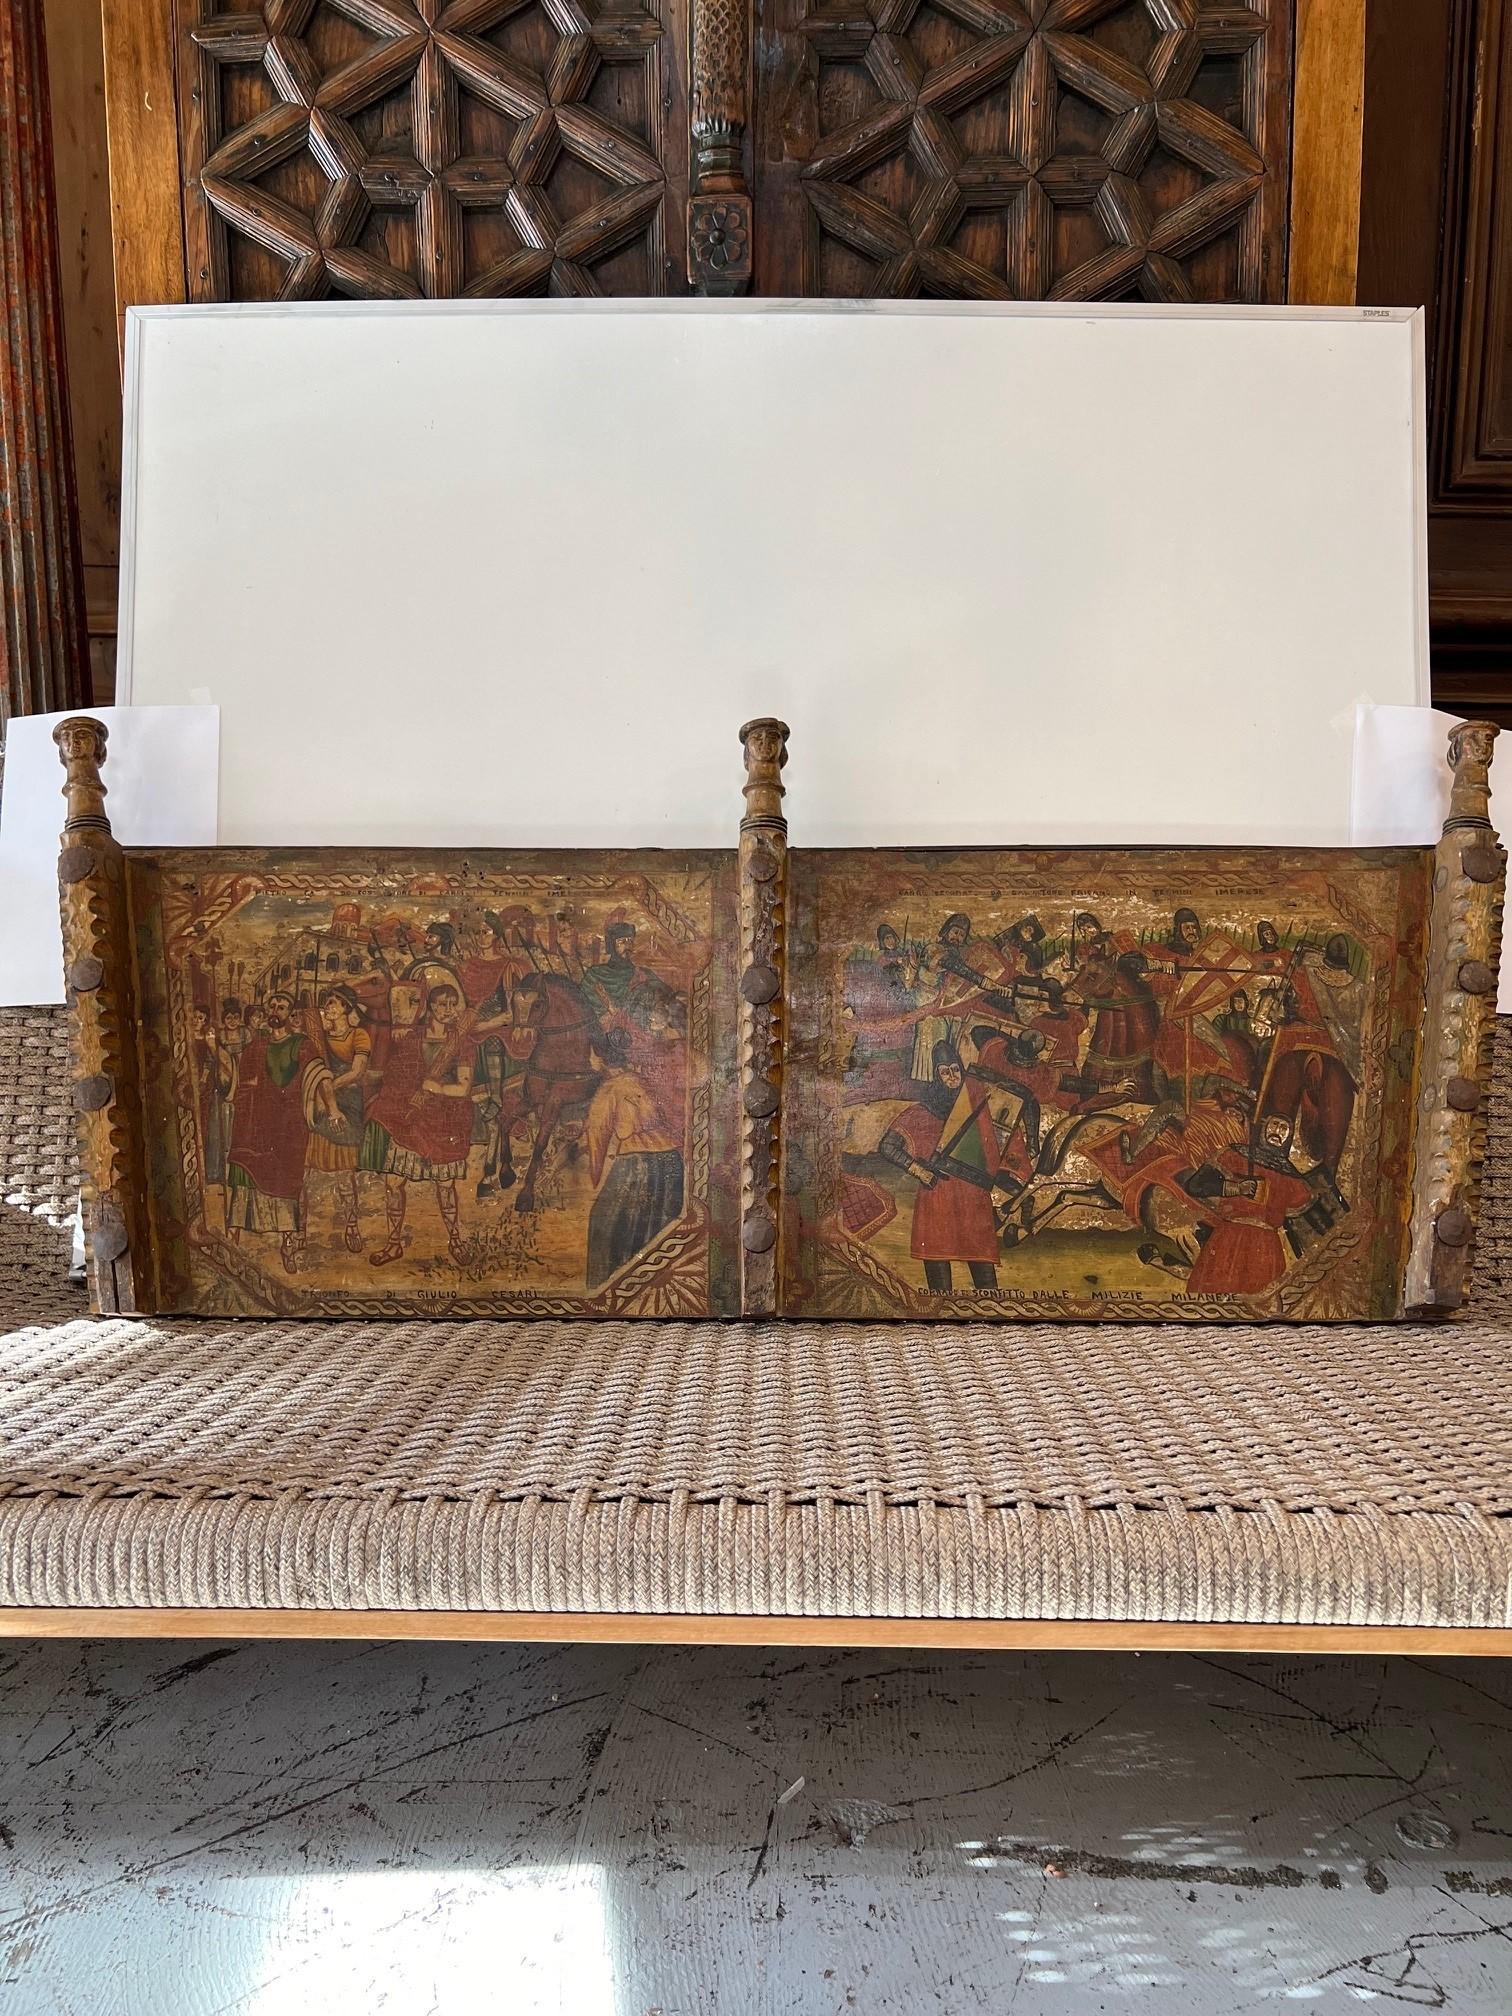 Antique carved wood hand painted Sicilian wedding or festival cart panel depicting historical events in Milan Italy.  Originally these horse drawn carts were created as a means to transport fruit, food, grains, etc. but were transformed into a